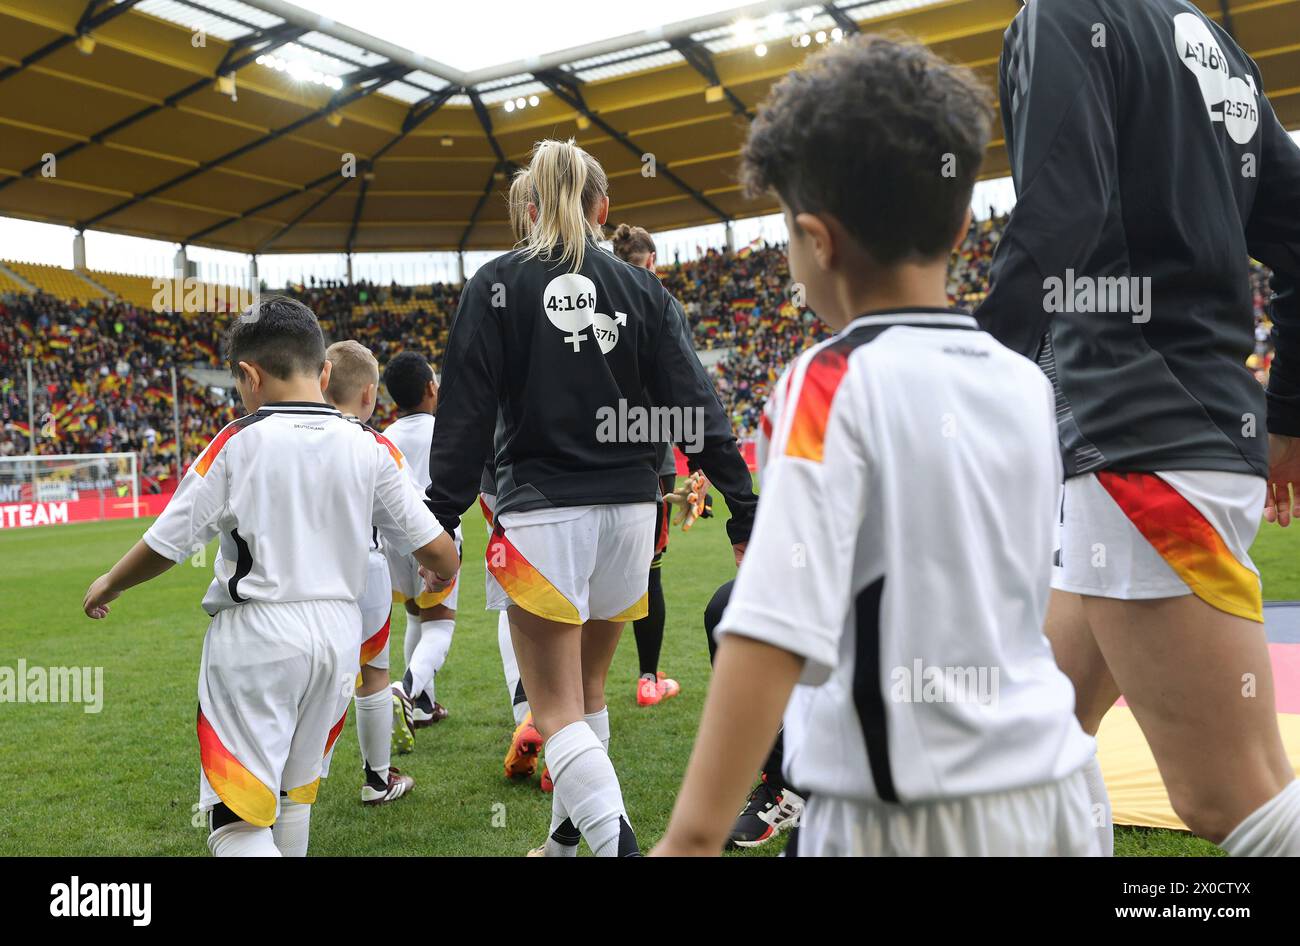 firo : 09.04.2024 Football, Football, 2023/2024 WOMEN'S INTERNATIONAL MATCH EM Euro Qualification EM Qualification Germany - Iceland Entry of the German team with message for women Justice on the tracksuit Sign for equal rights Instead of the logo of the household appliance manufacturer, the numbers '4:16' and '2:57' will be seen on the backs of the national players. With these numbers, the women want to point out an imbalance in the performance of work for the household and family. While women spend an average of 4:16 hours a day on care work, i.e. looking after children, this time is only 2: Stock Photo